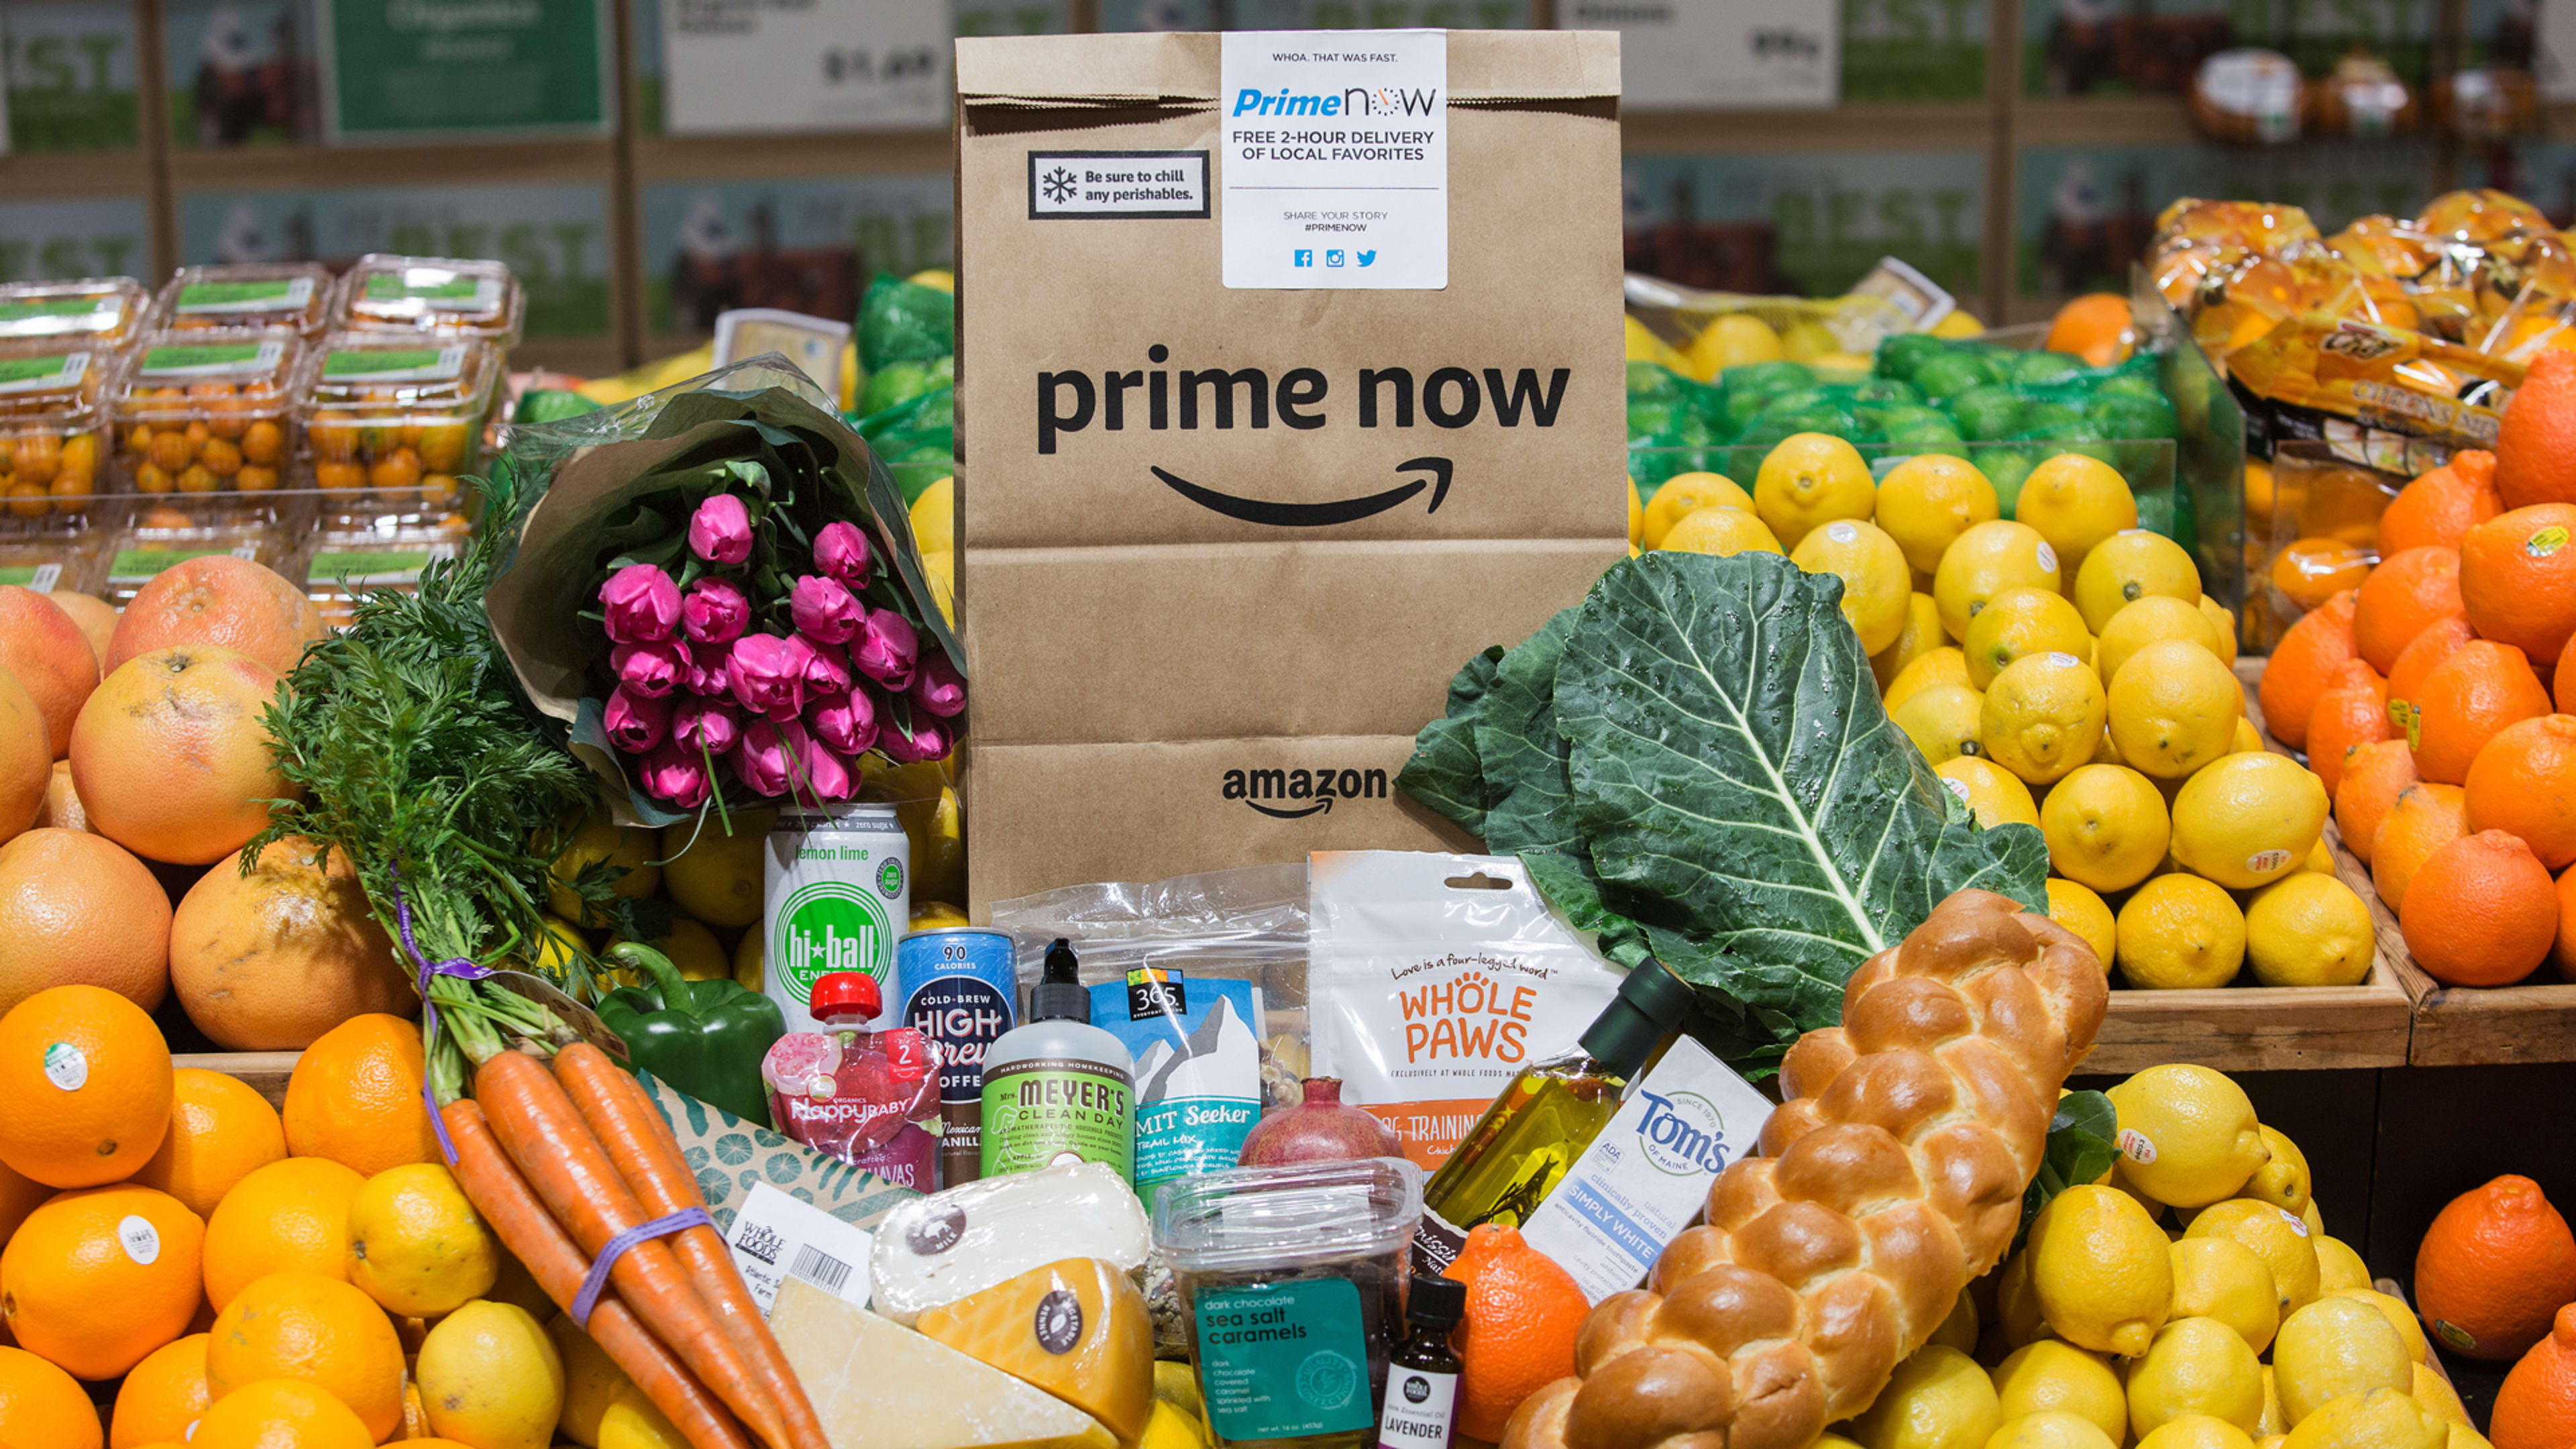 Amazon Prime members across the country now get more savings at Whole Foods